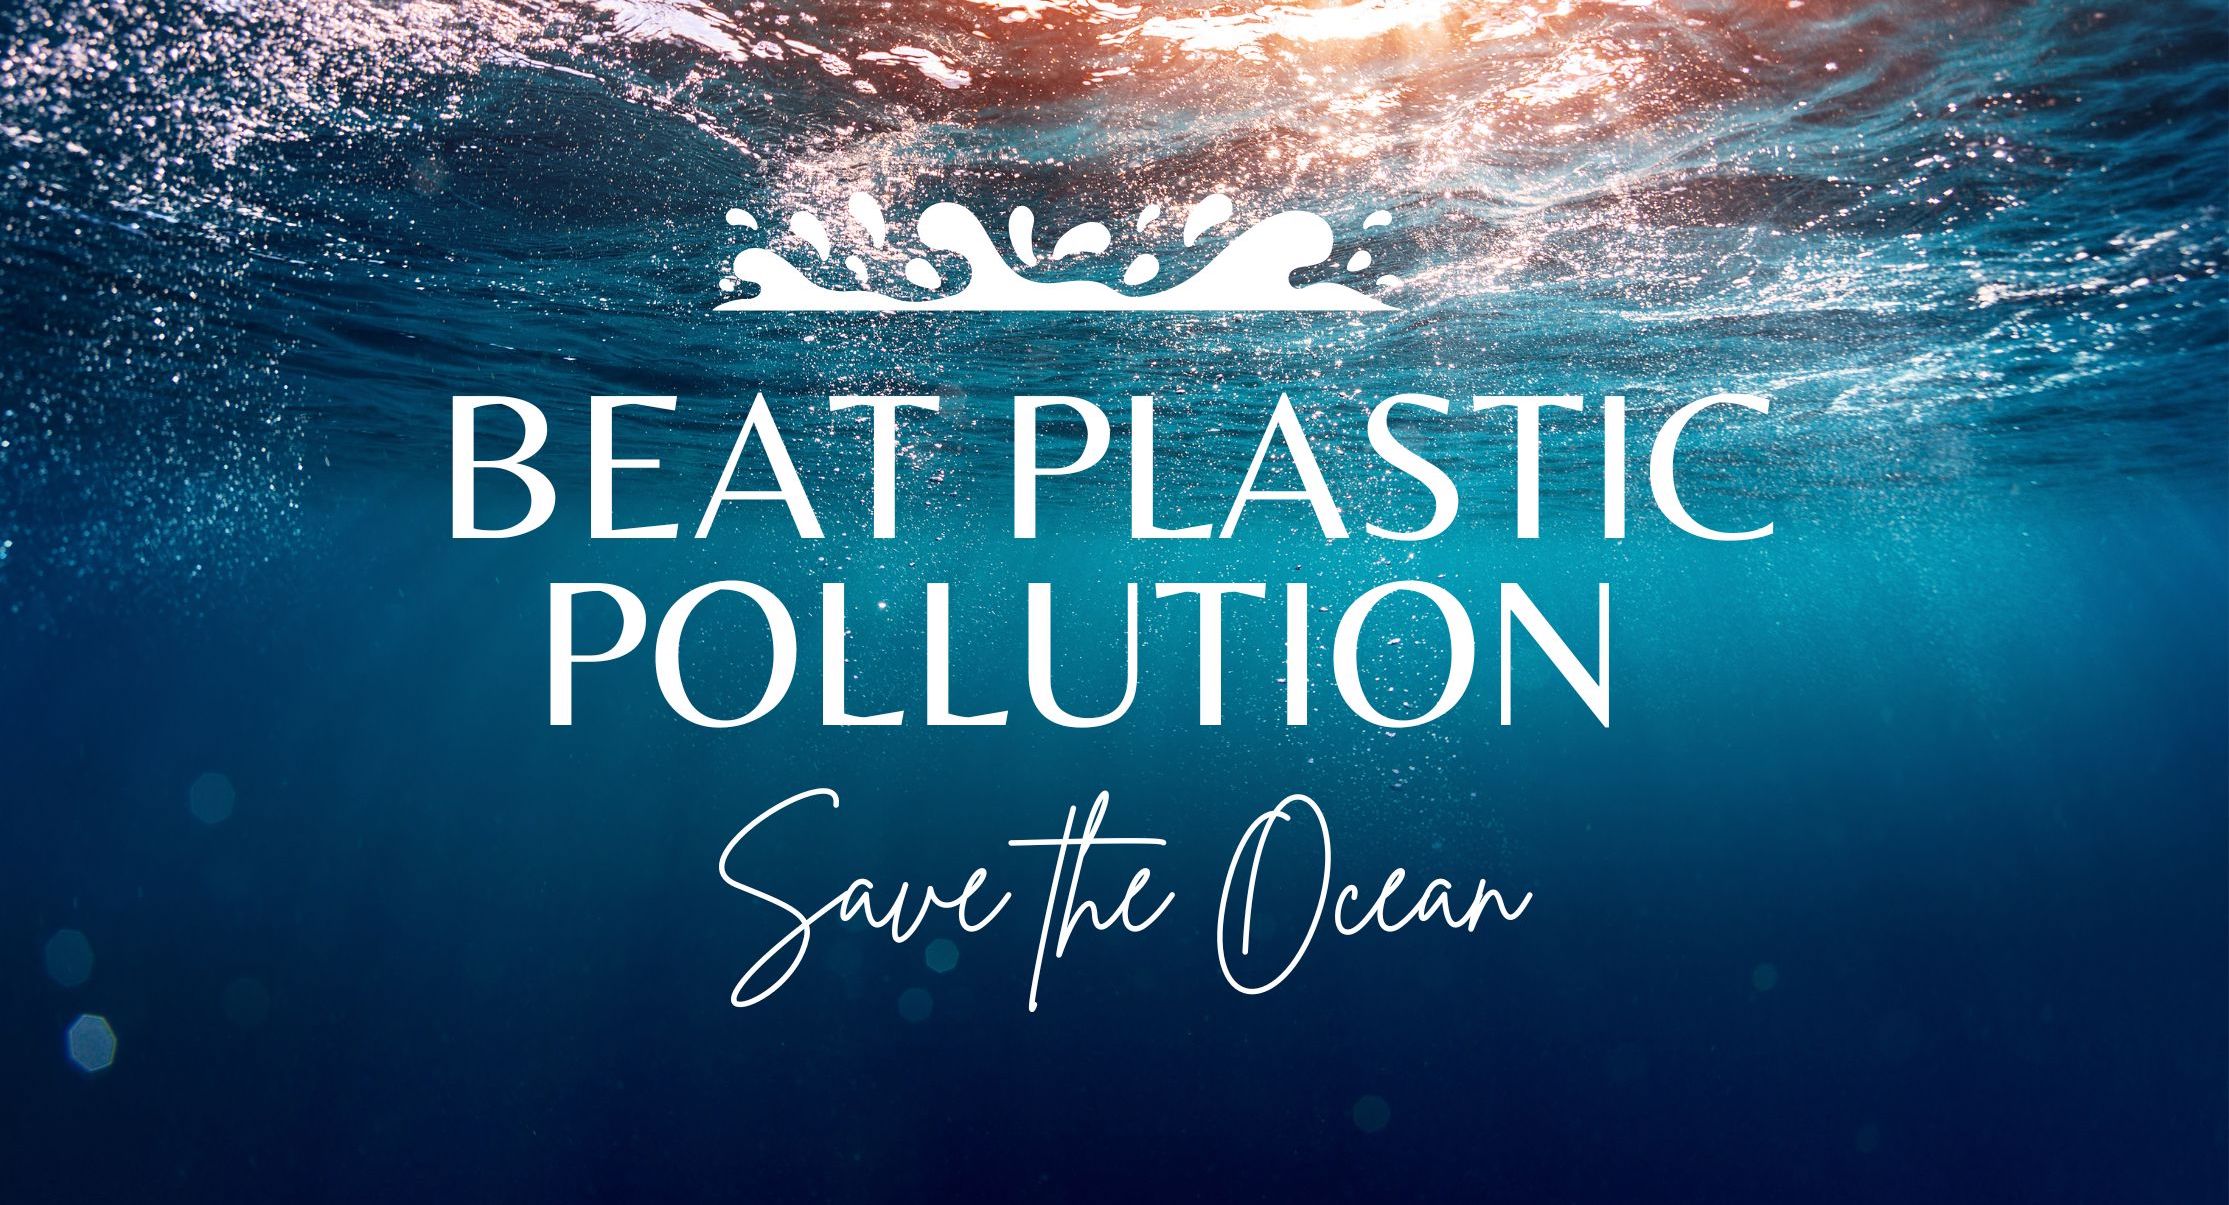 Beat Plastic Pollution & Save the Ocean